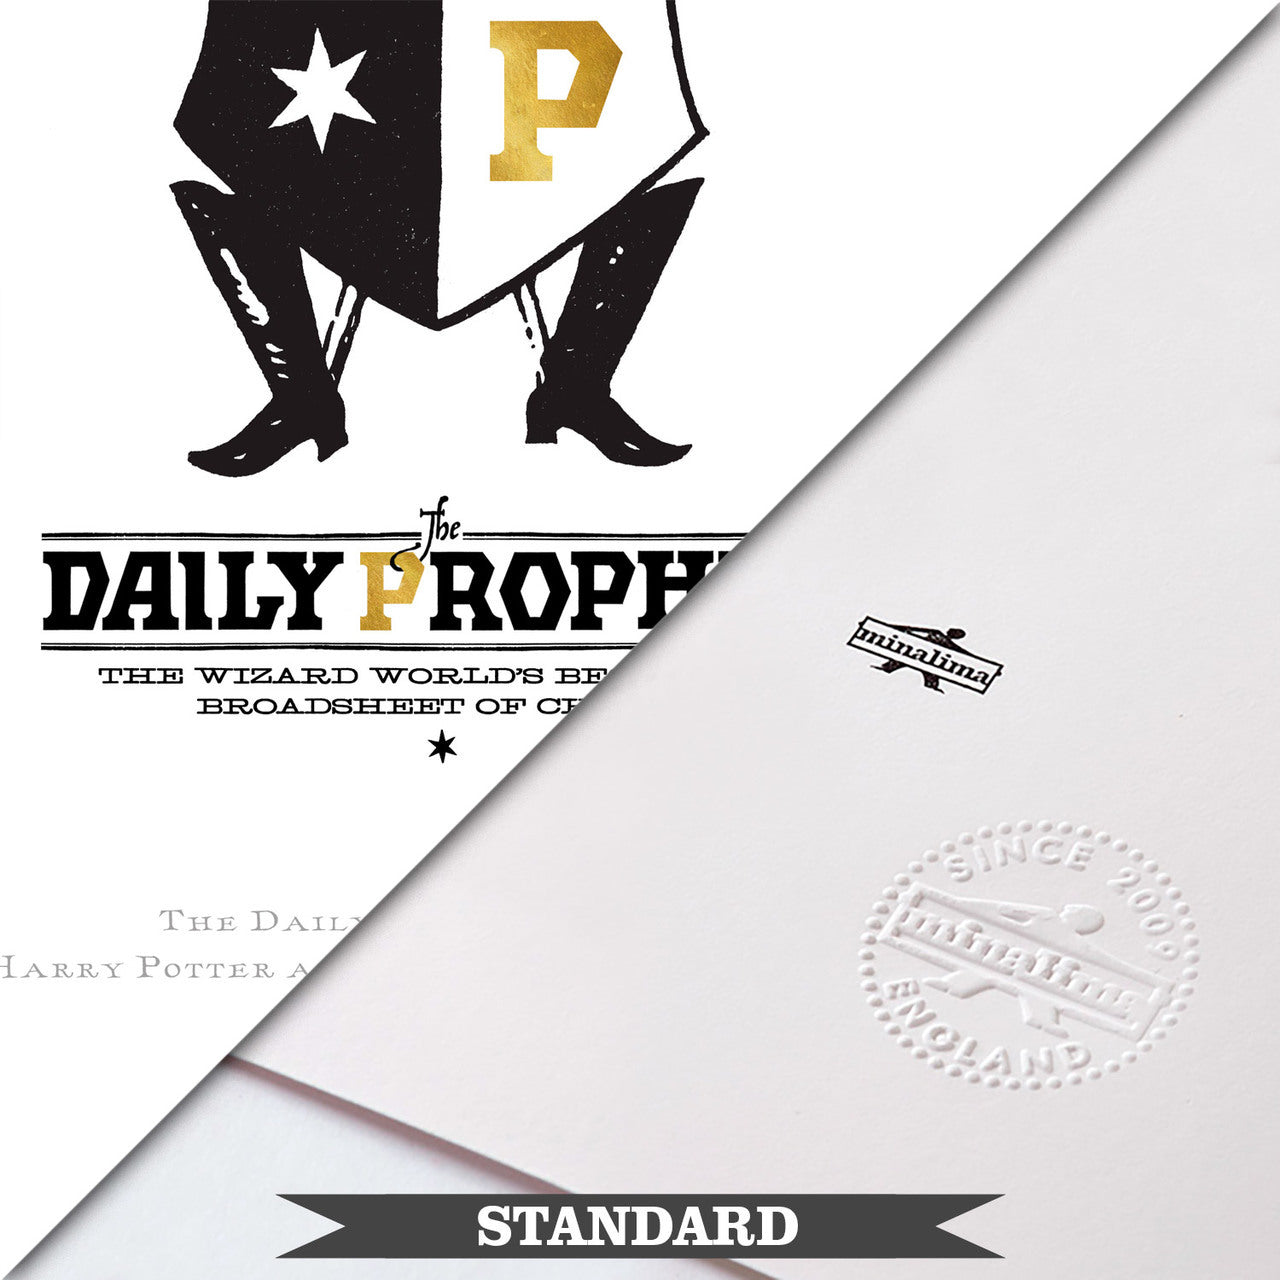 The Daily Prophet Insignia Limited Edition Art Print